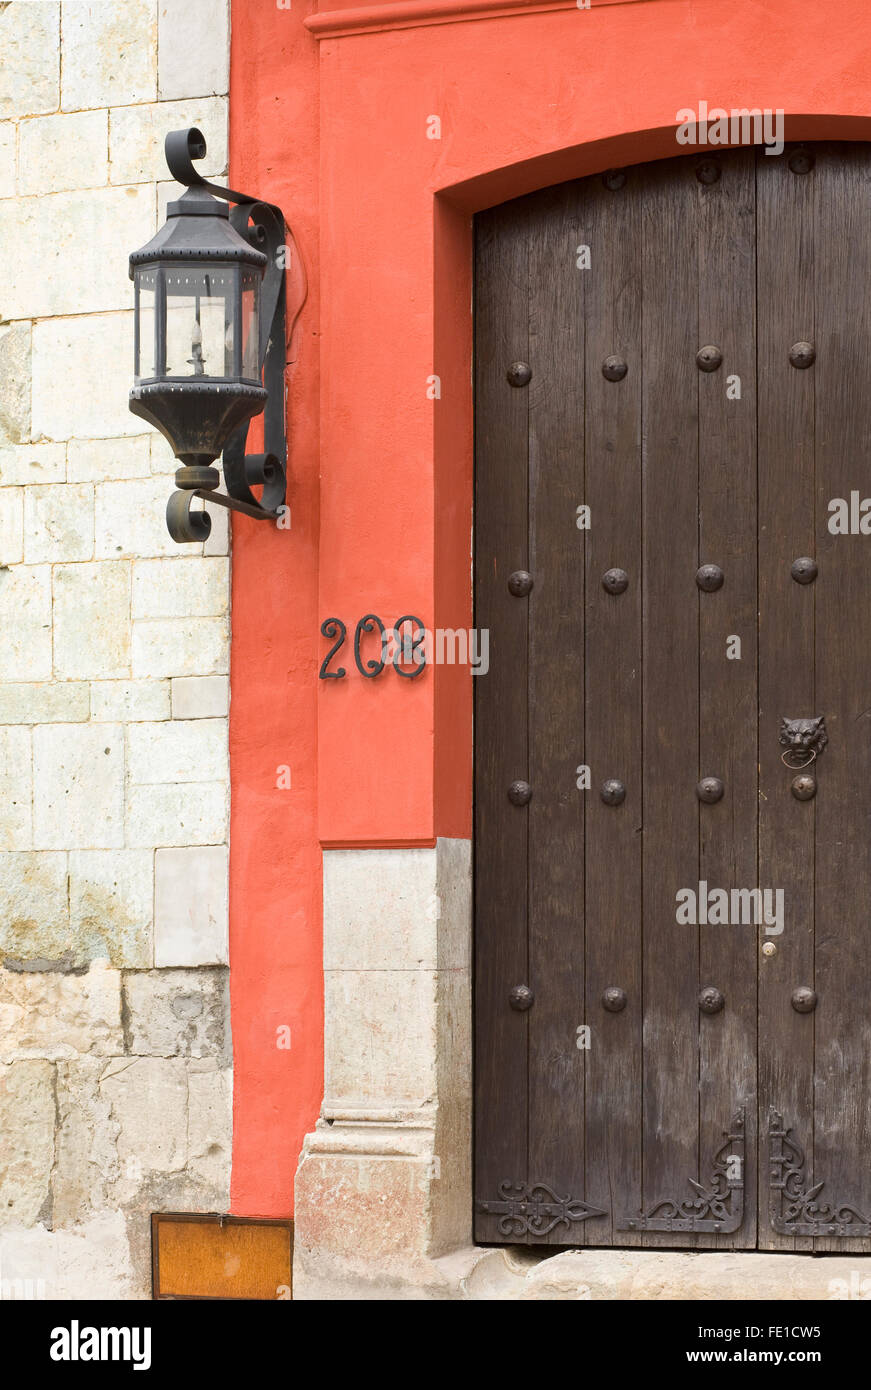 Wooden garage door, wrought iron lamp and house numbers of a typical home entryway, Oaxaca City, Oaxaca, Mexico Stock Photo